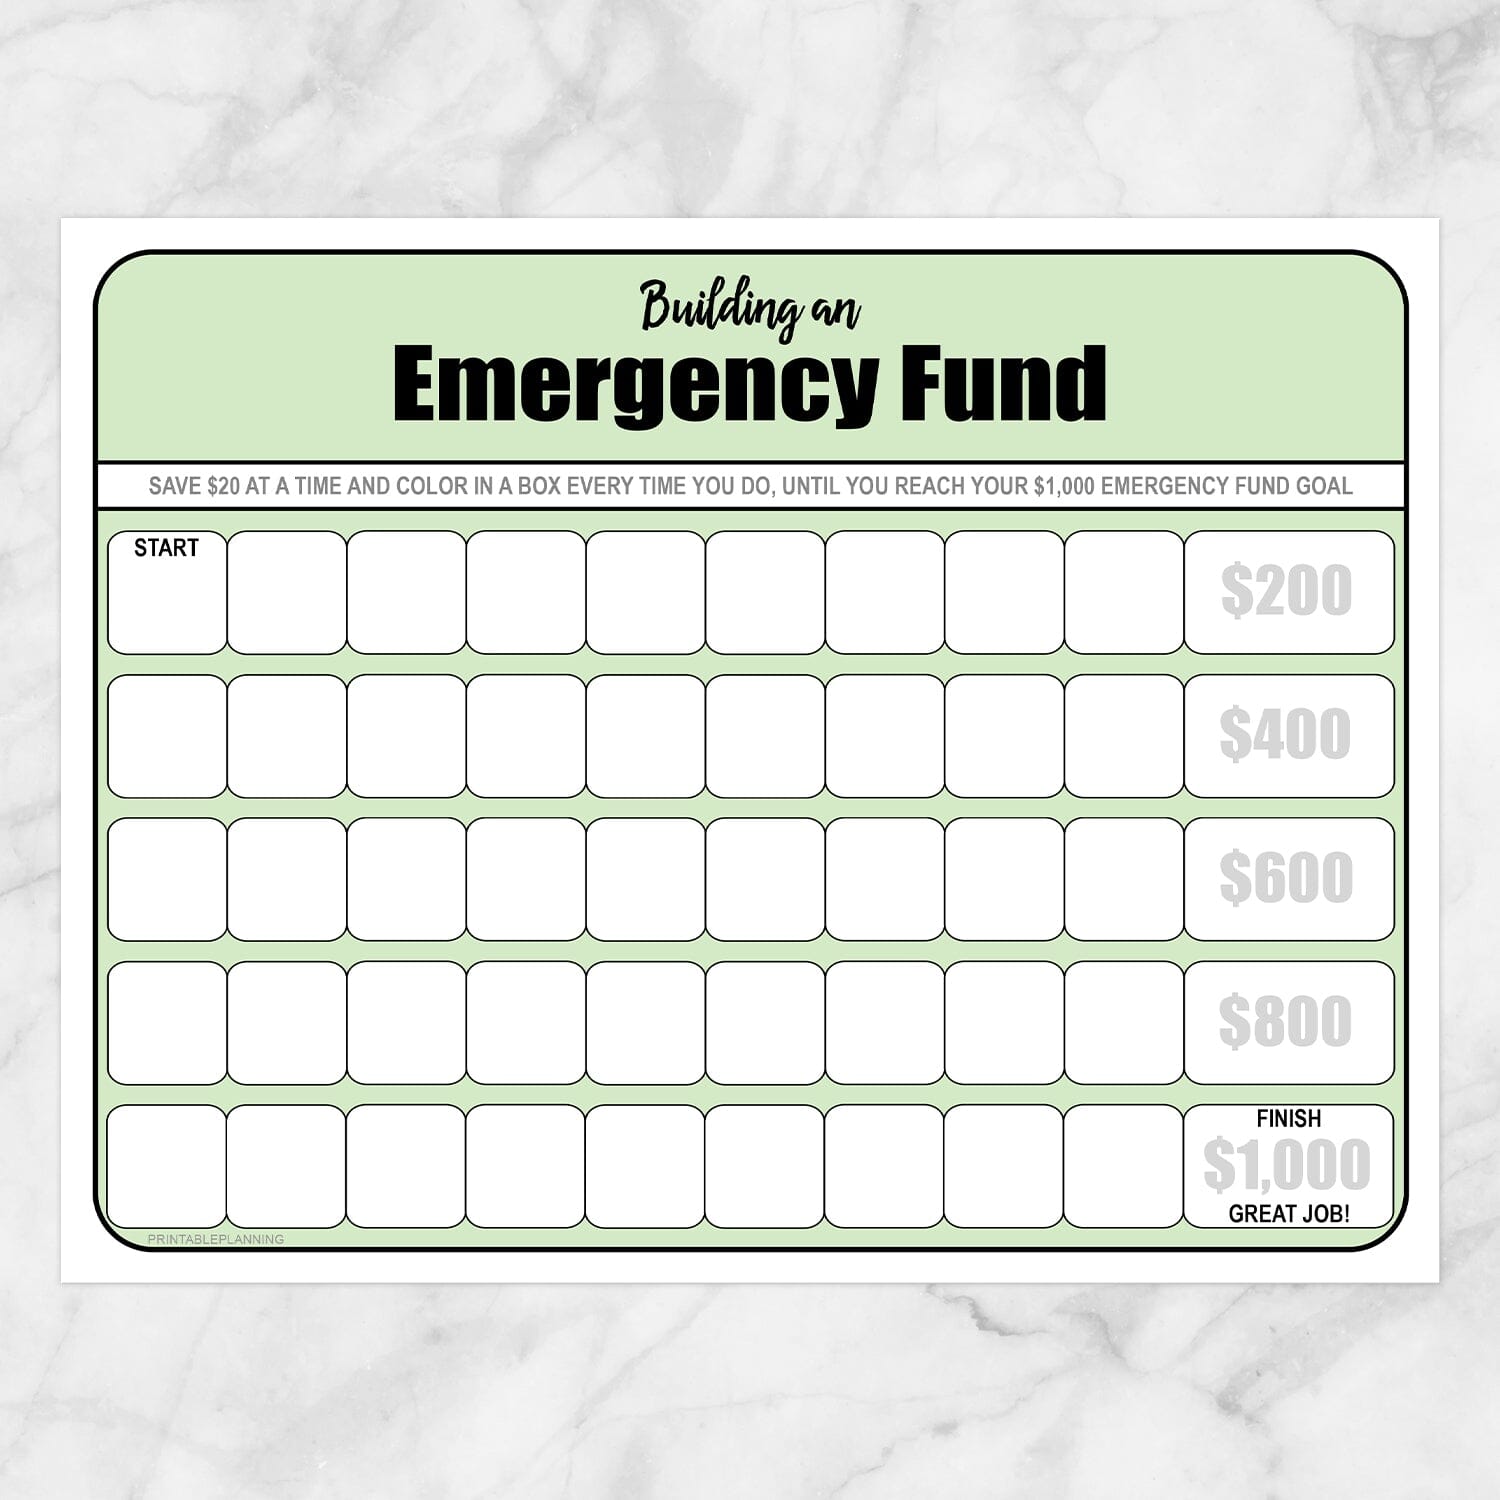 Printable Building an Emergency Fund Worksheet in Green (by $20 increments) at Printable Planning.